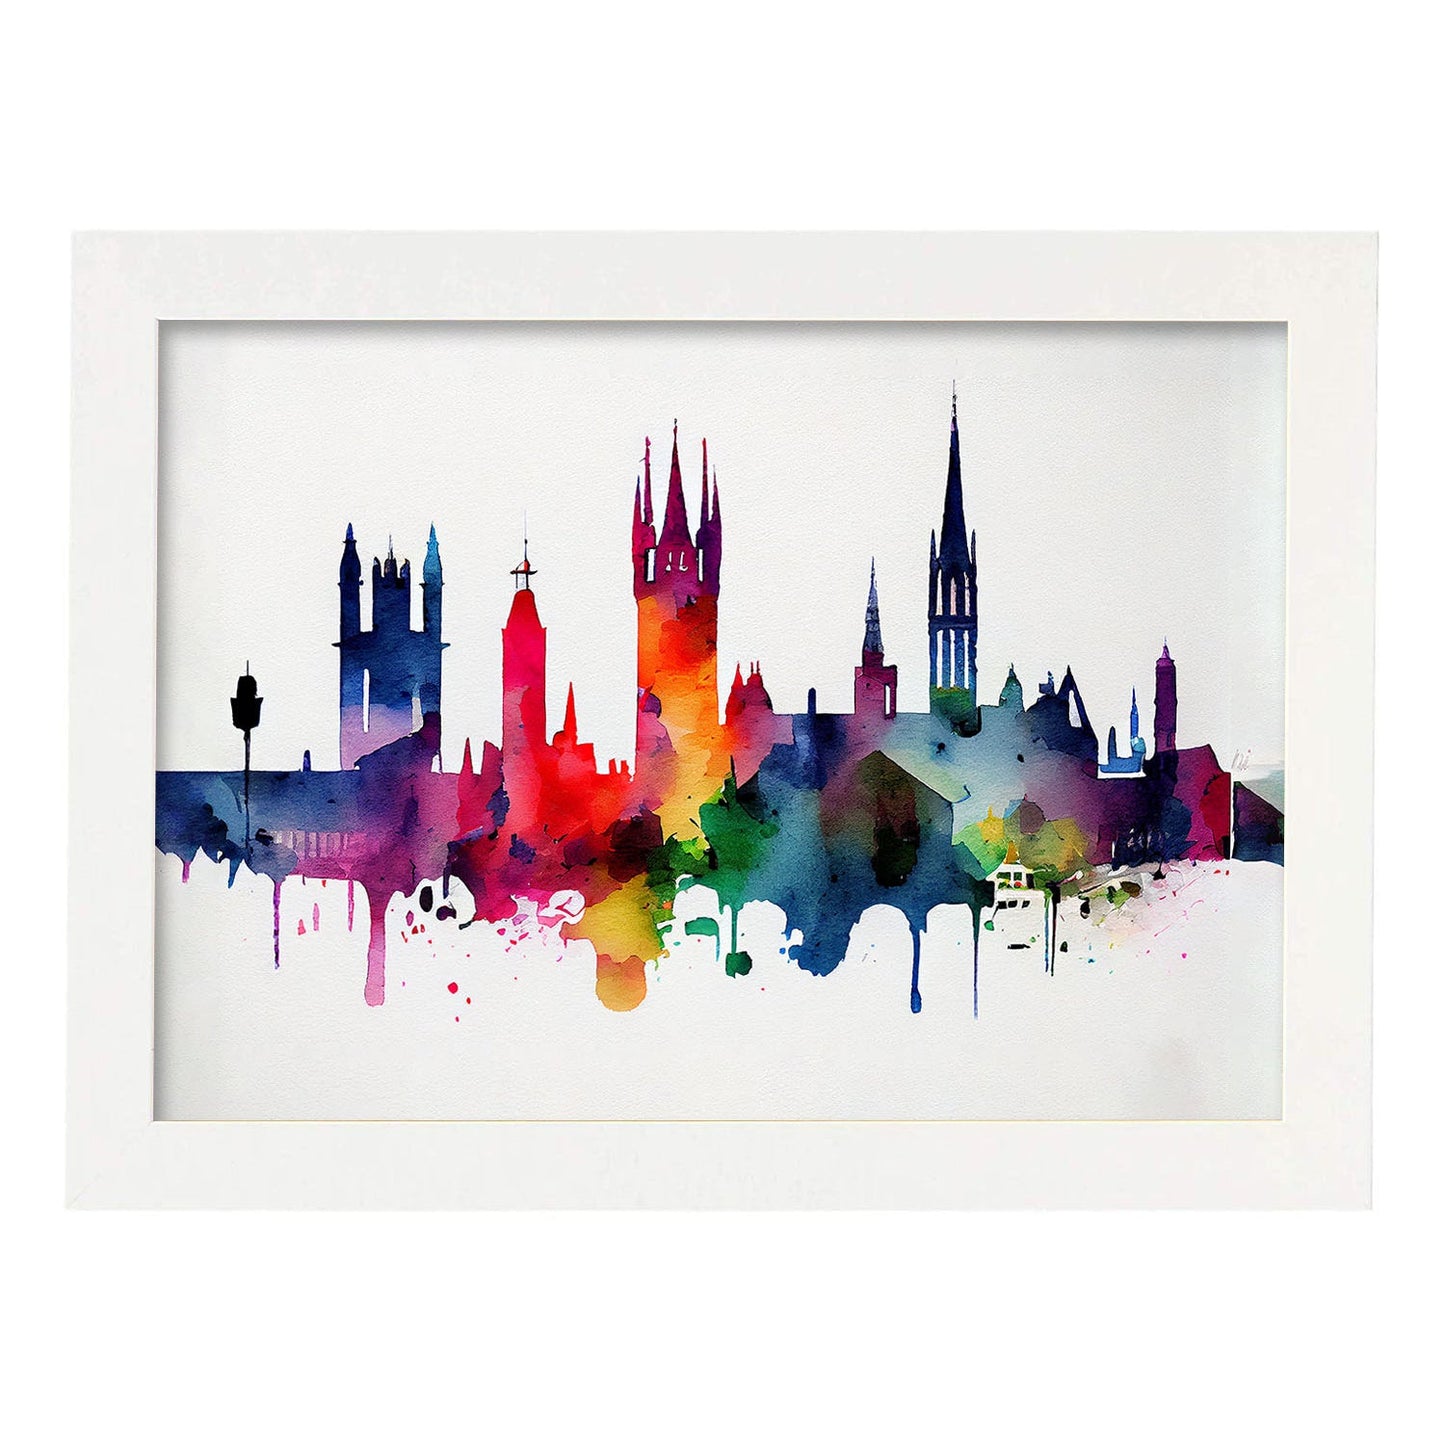 Nacnic watercolor of a skyline of the city of Bruges. Aesthetic Wall Art Prints for Bedroom or Living Room Design.-Artwork-Nacnic-A4-Marco Blanco-Nacnic Estudio SL